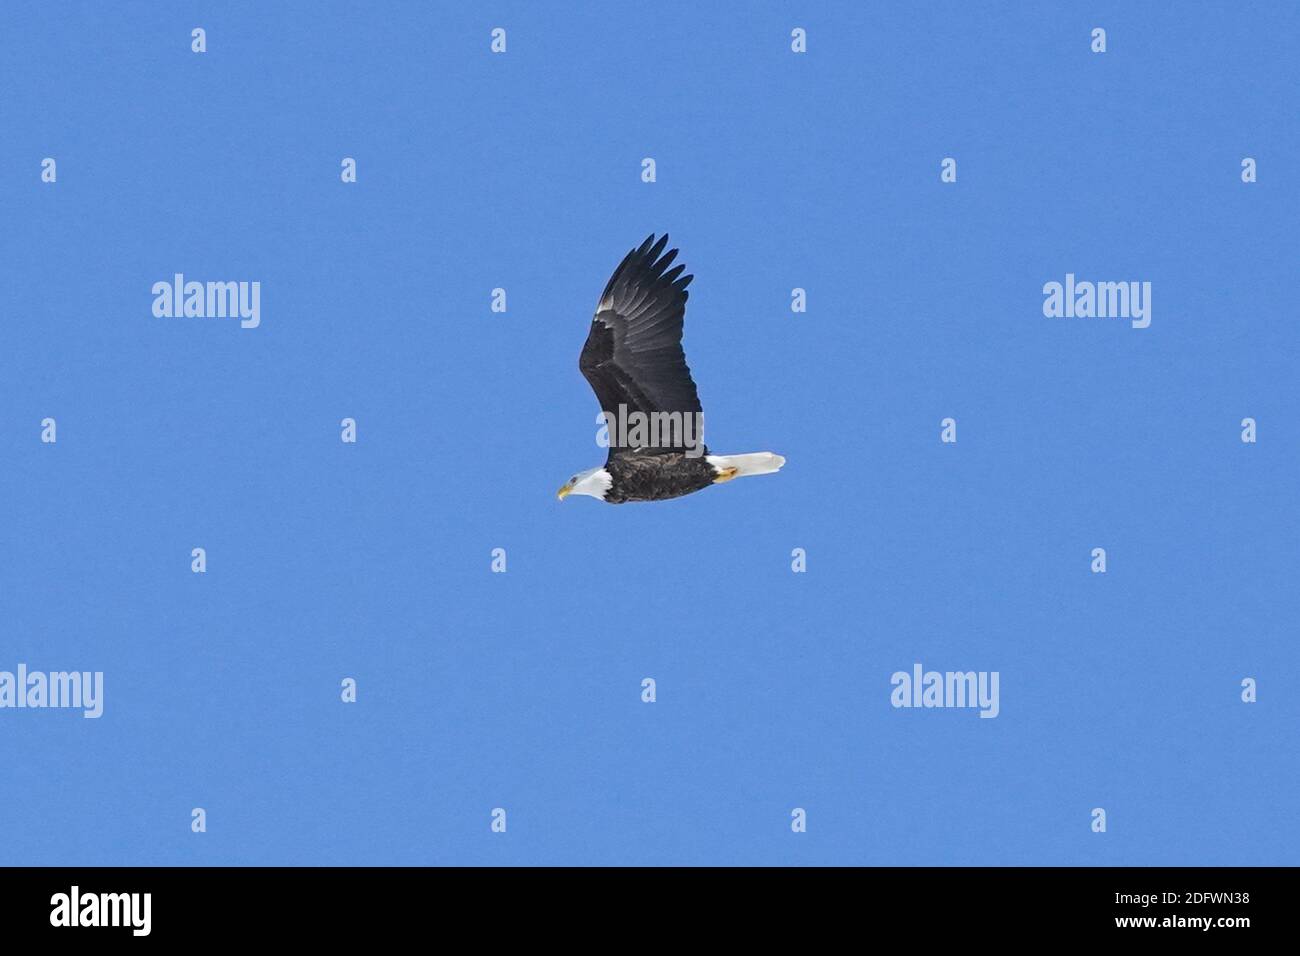 Wild Bald eagle flying in winter sky Stock Photo